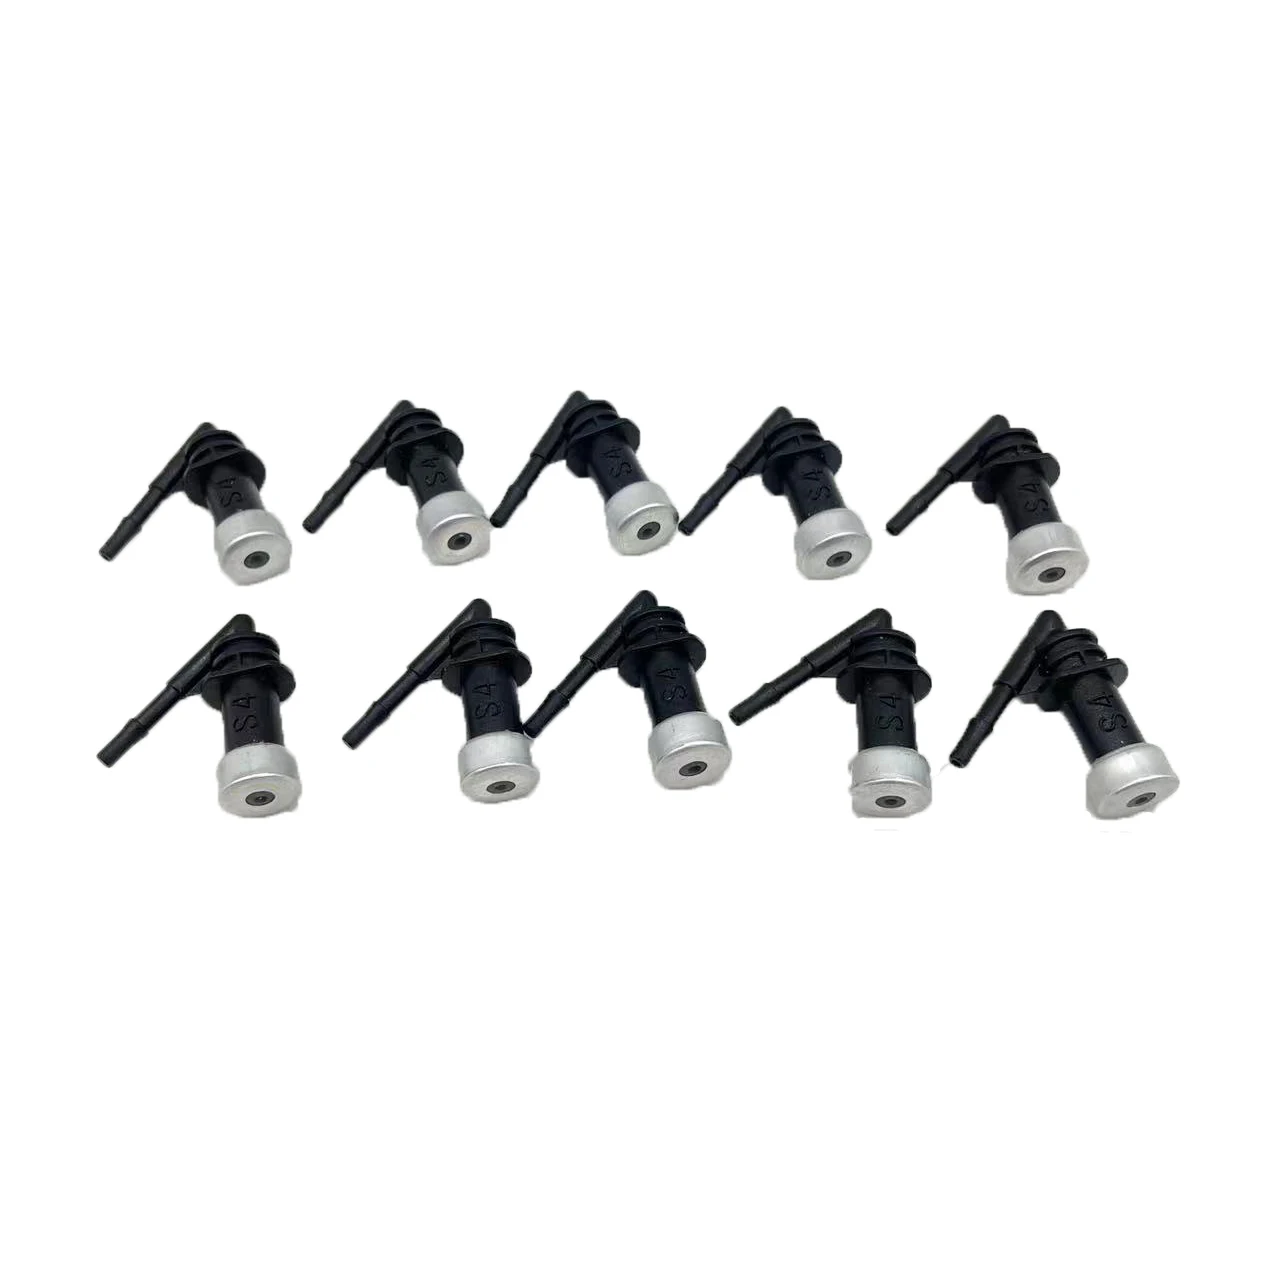 10-50pcs Nozzle For Designjet T610 T1100 T770 T790 T1200 T1300 Z2100 Z3100 Z3200 Z5200 Z5400 #70 #72 Printhead Ink Tubes Nozzle